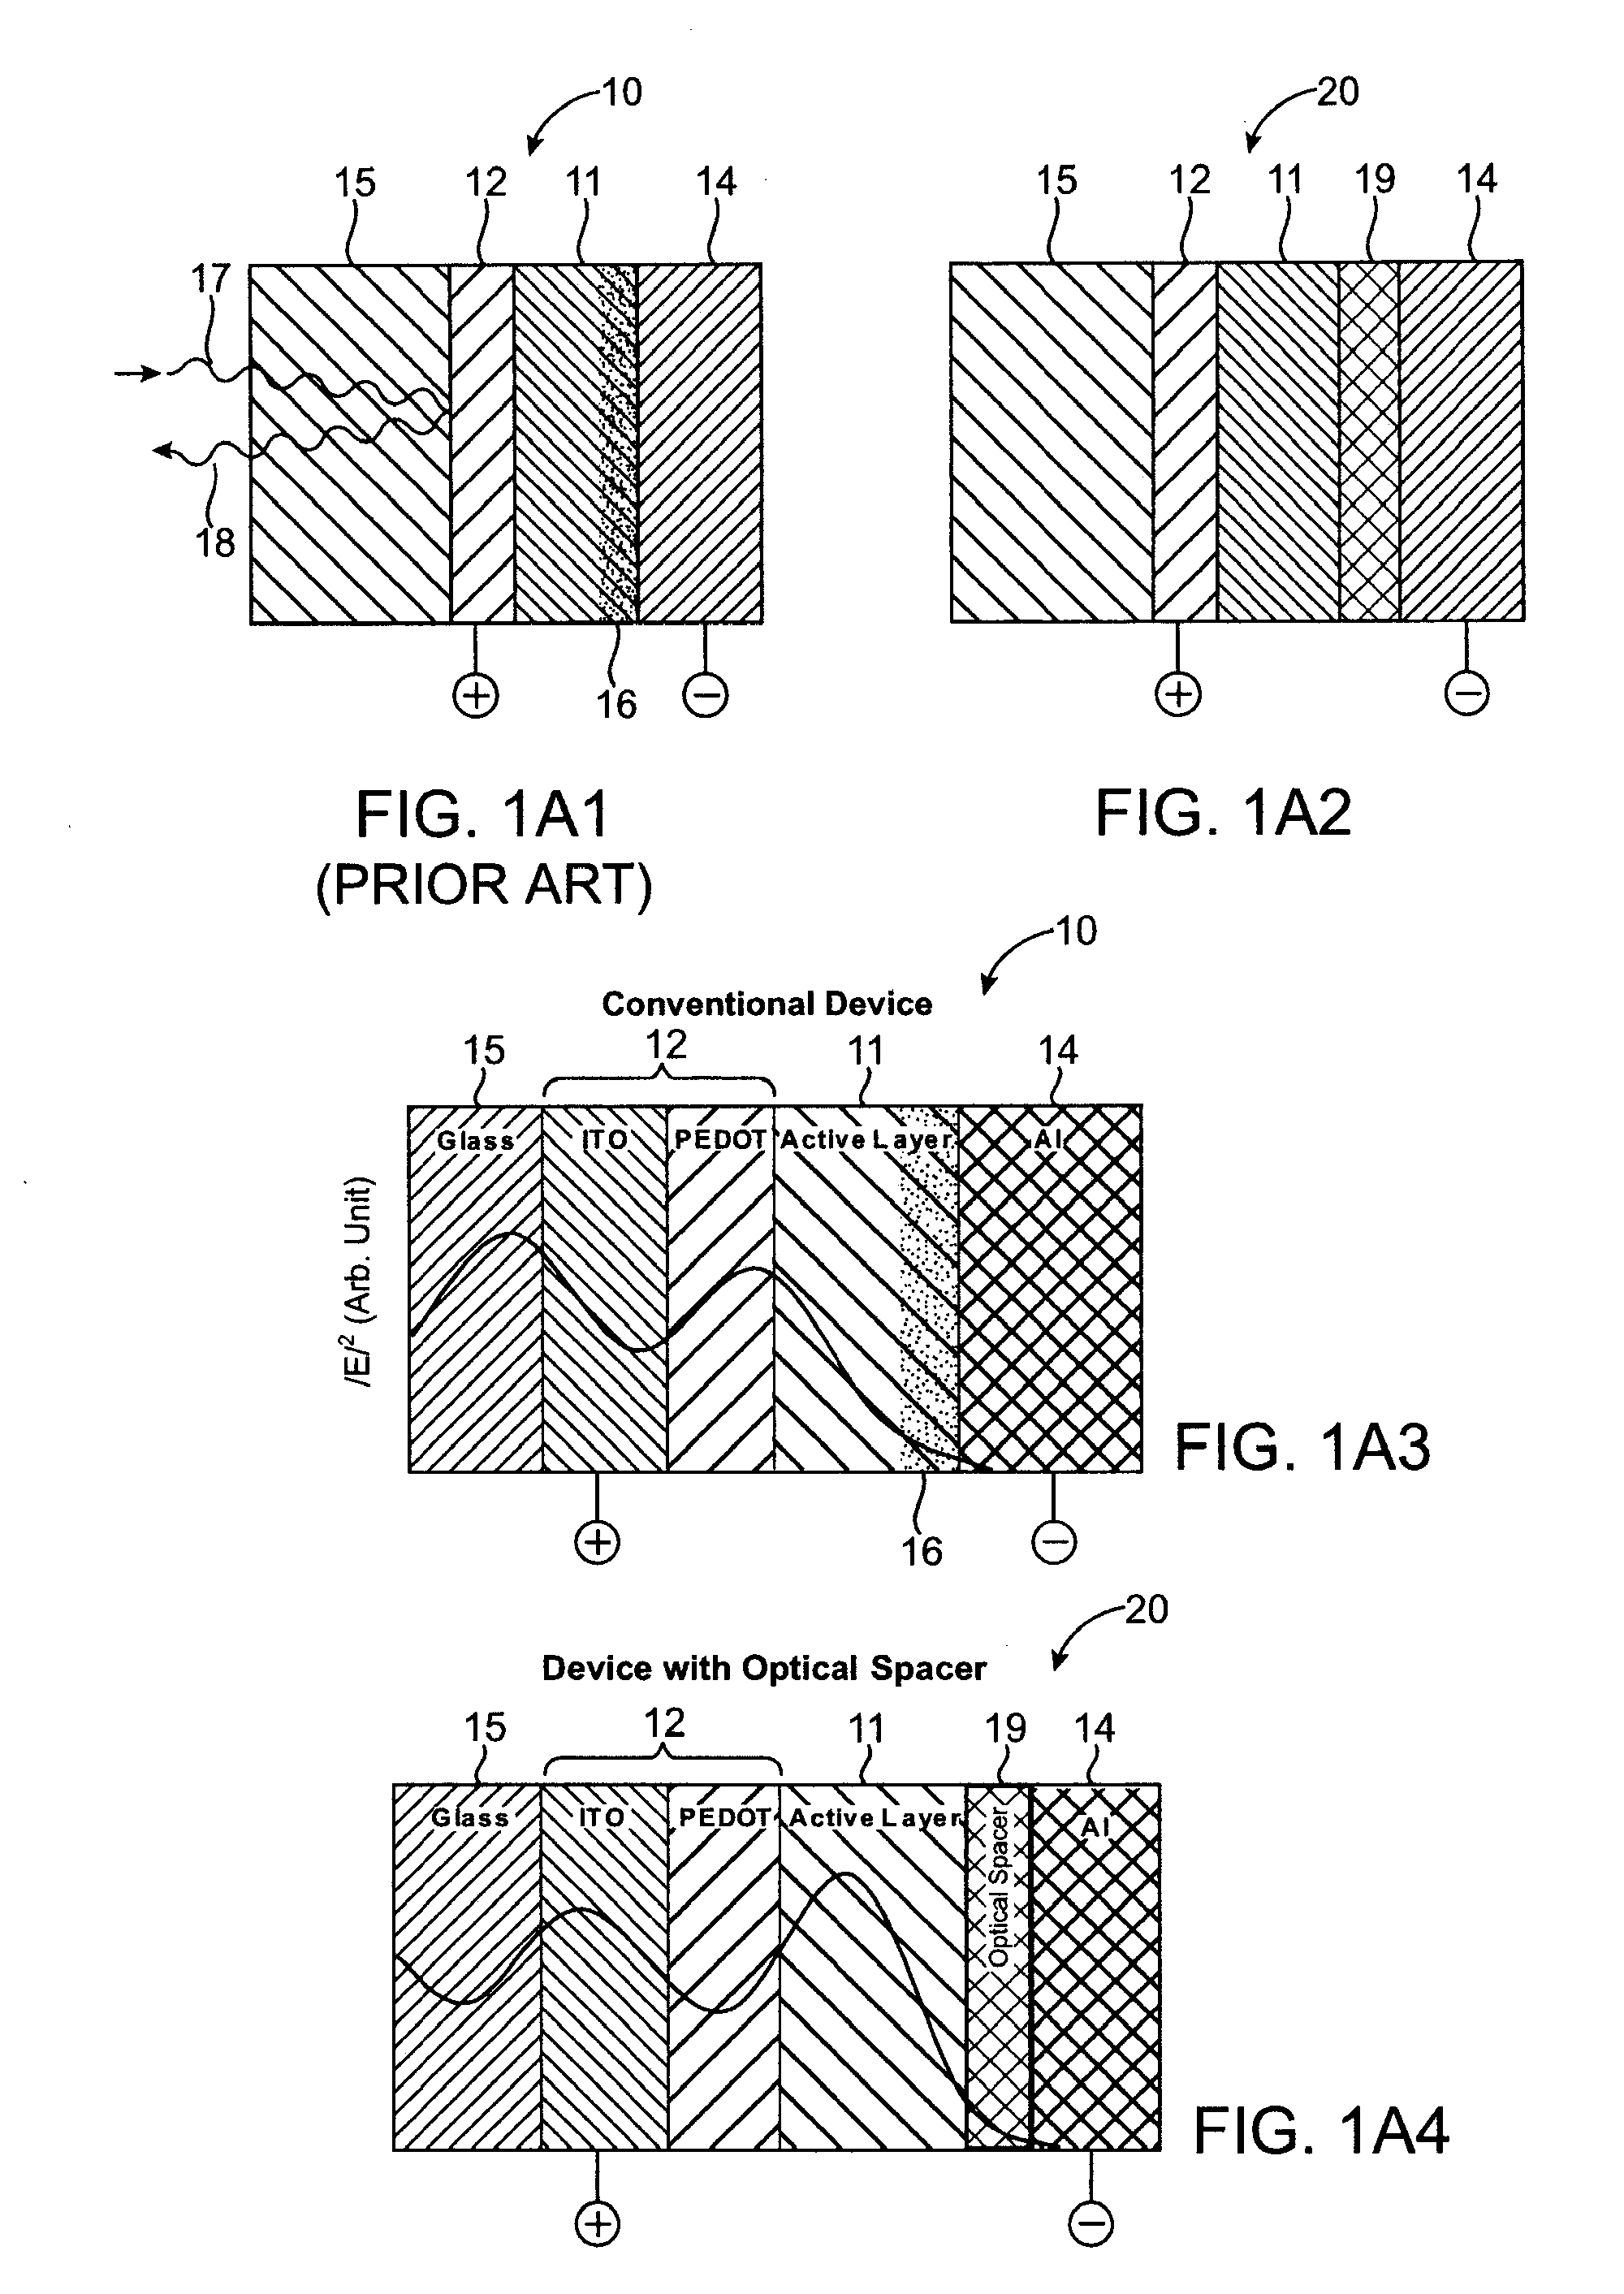 Architecture for high efficiency polymer photovoltaic cells using an optical spacer